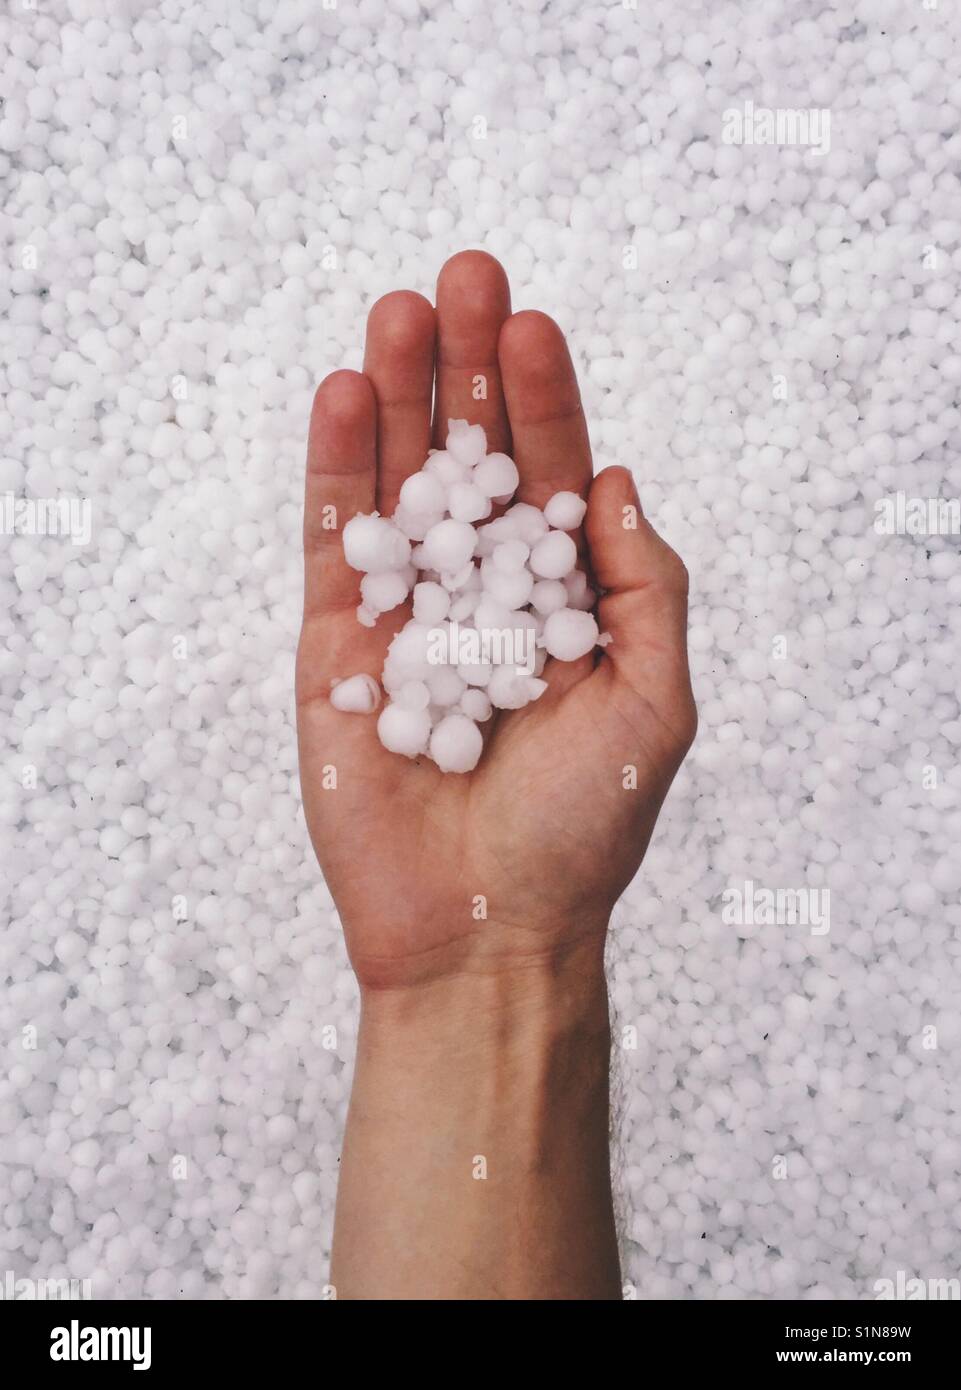 Hail Storm in Hand Stock Photo